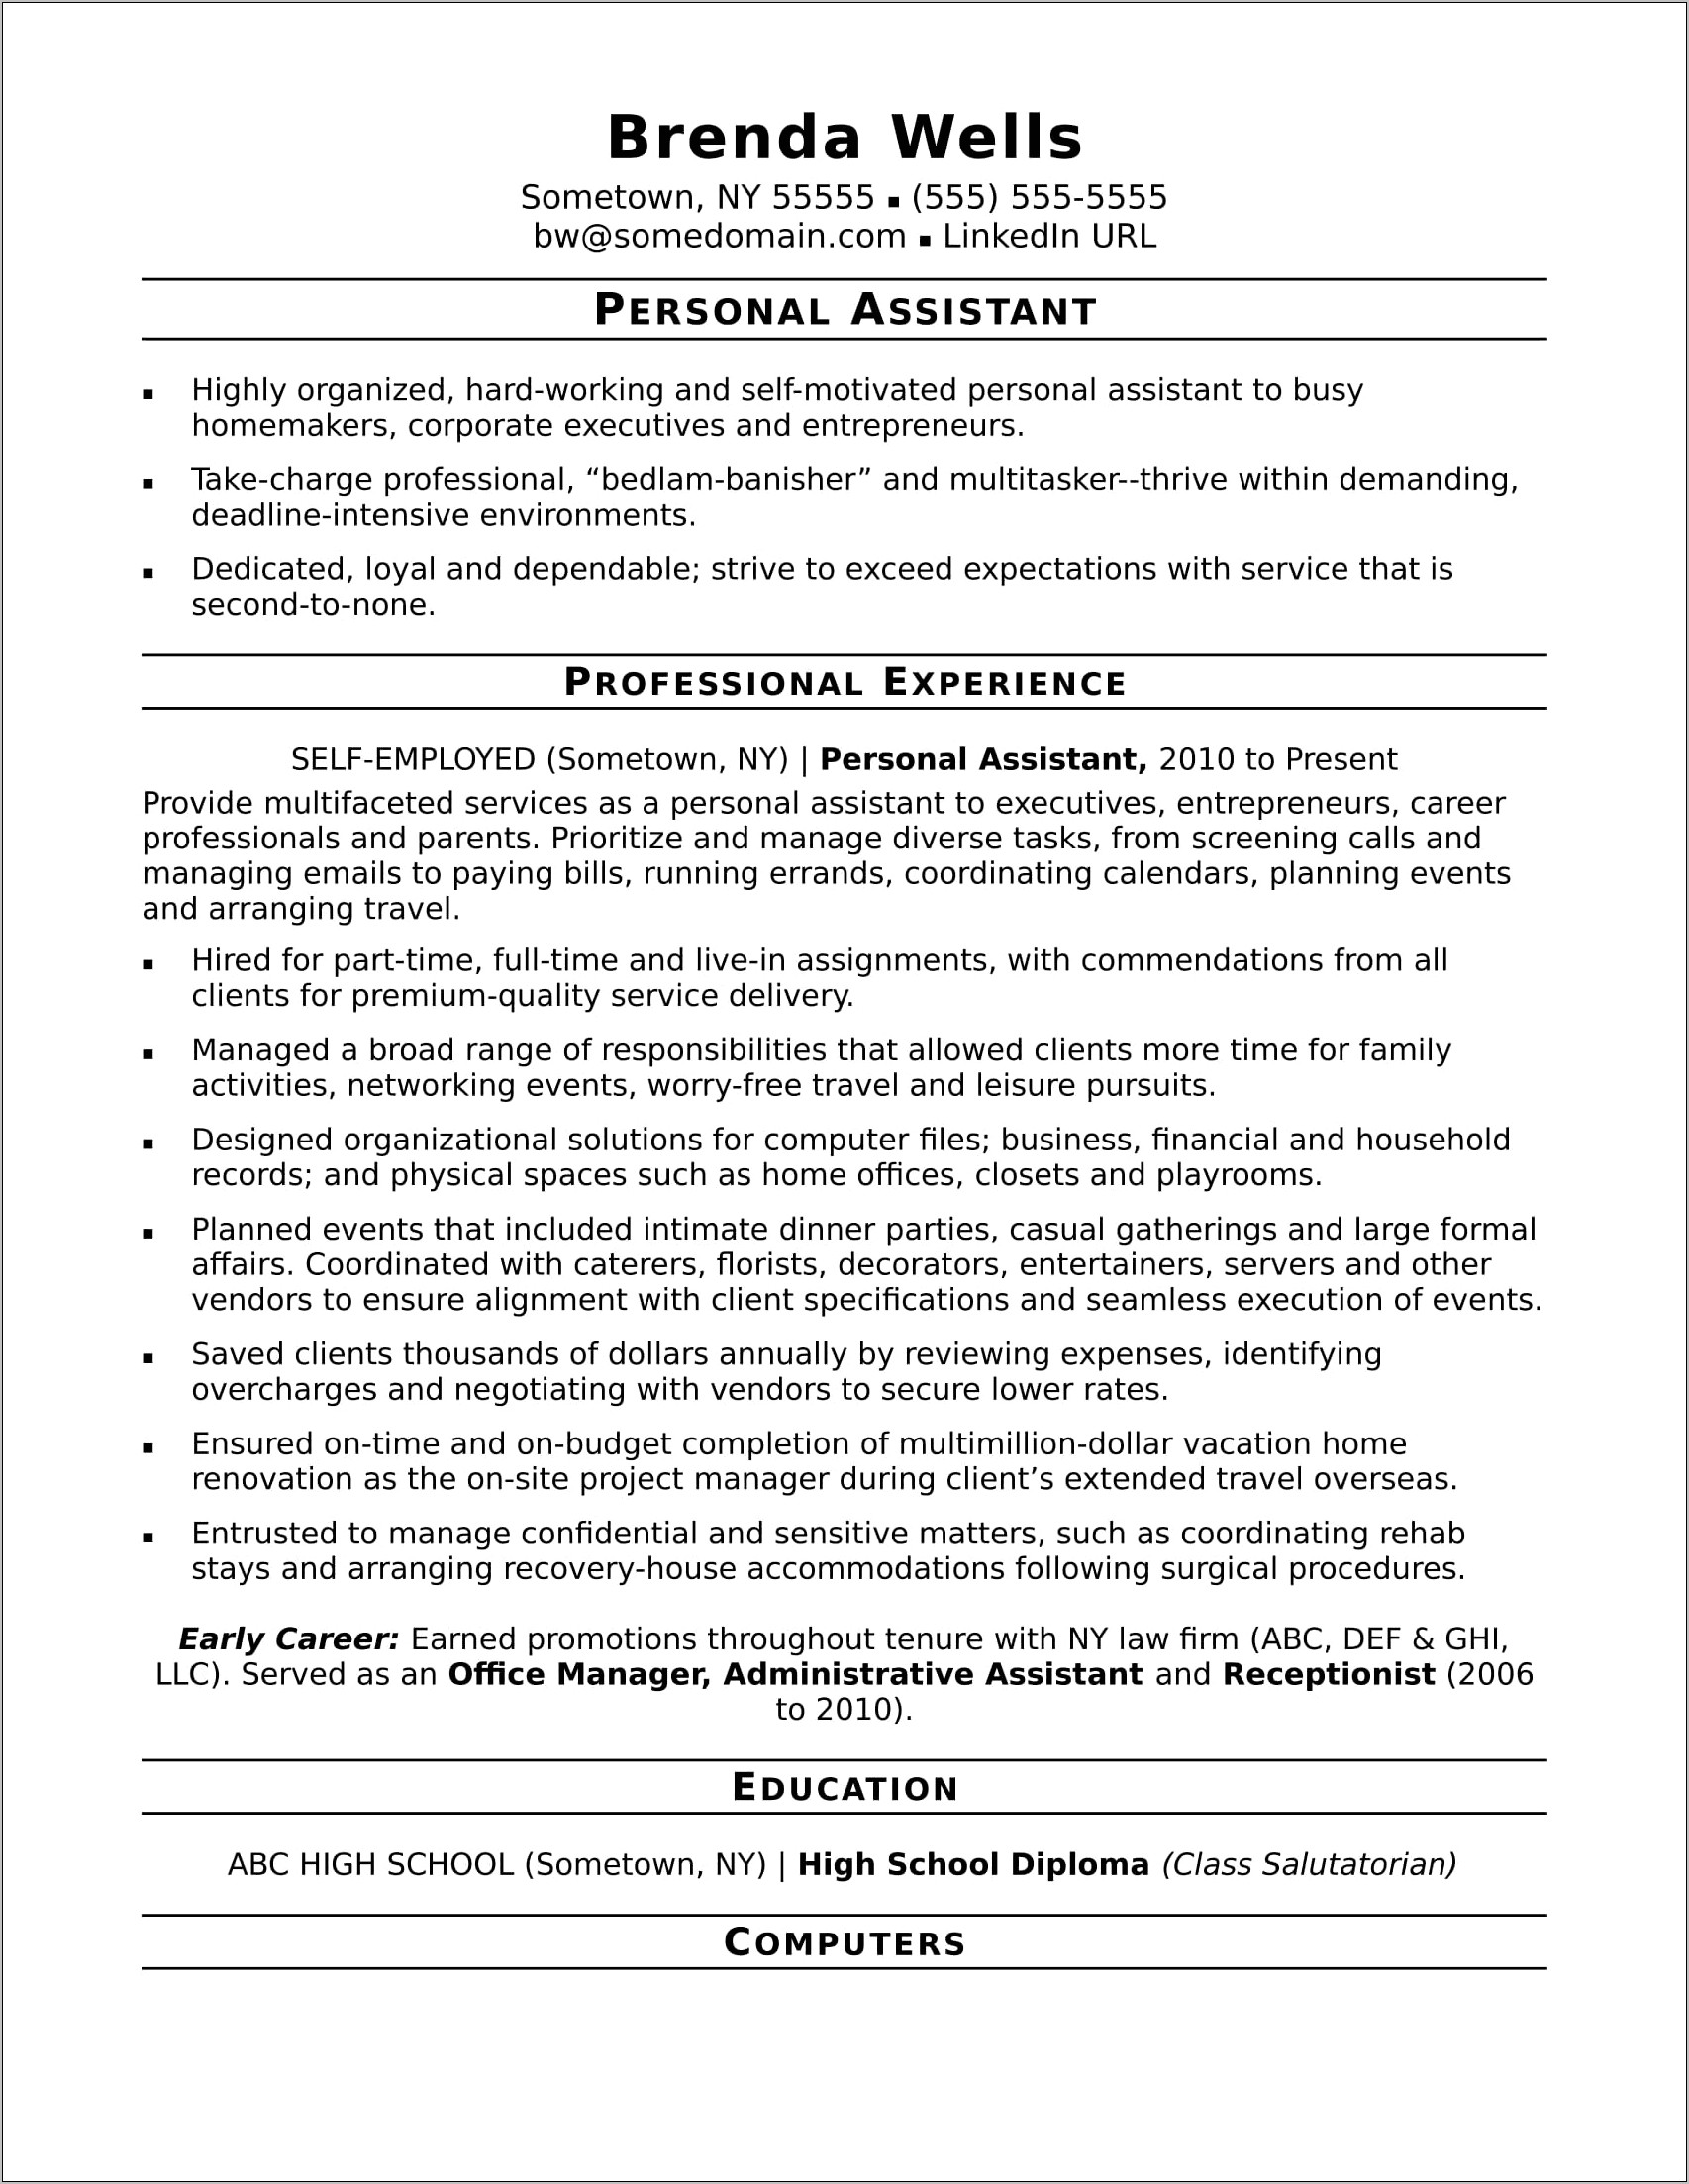 Resumes Examples Using Objectives With Loyal And Dependable